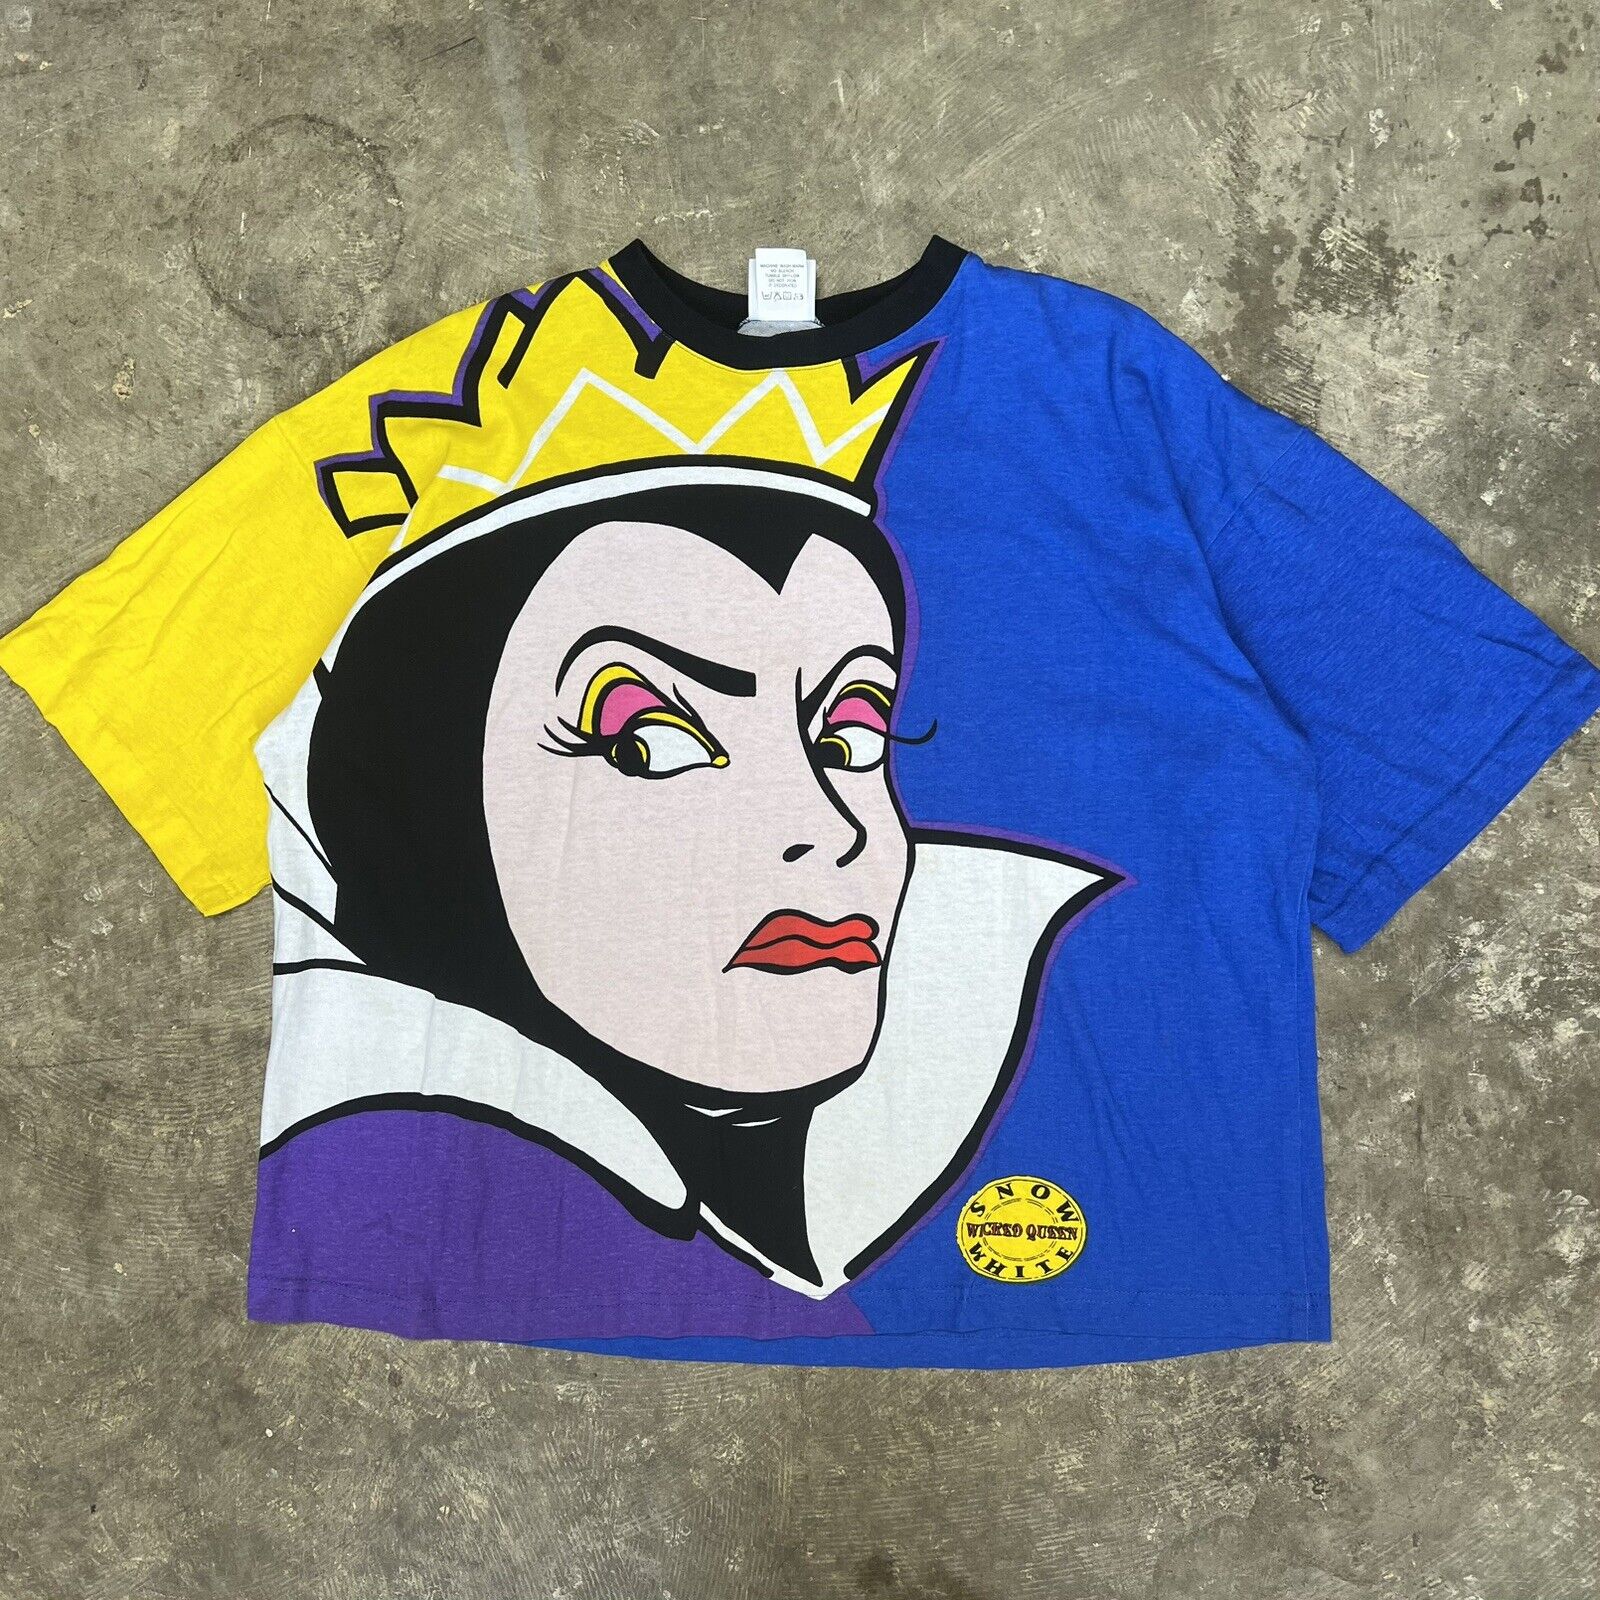 Vintage 90’s Snow White / Wicked Witch Disney All Over Print T Shirt Size S M